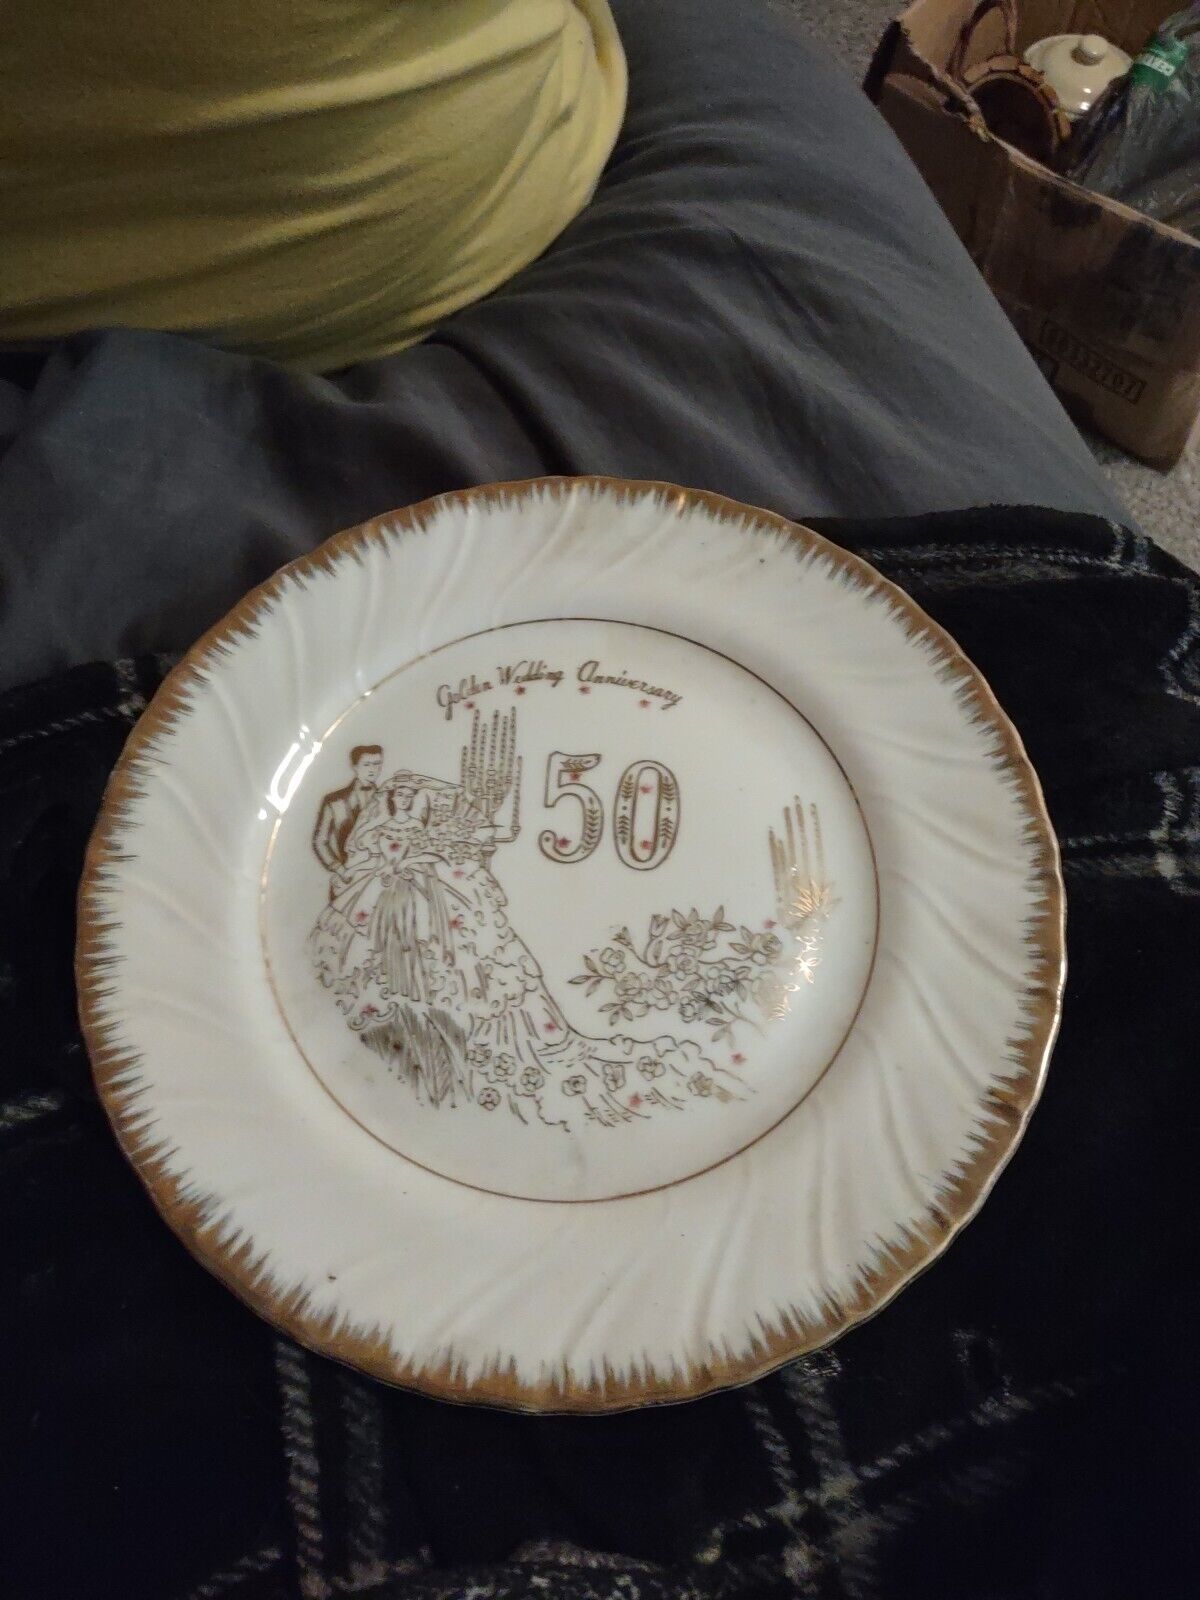 50th Gold Wedding Anniversary Decorative Plate with Bride and Groom